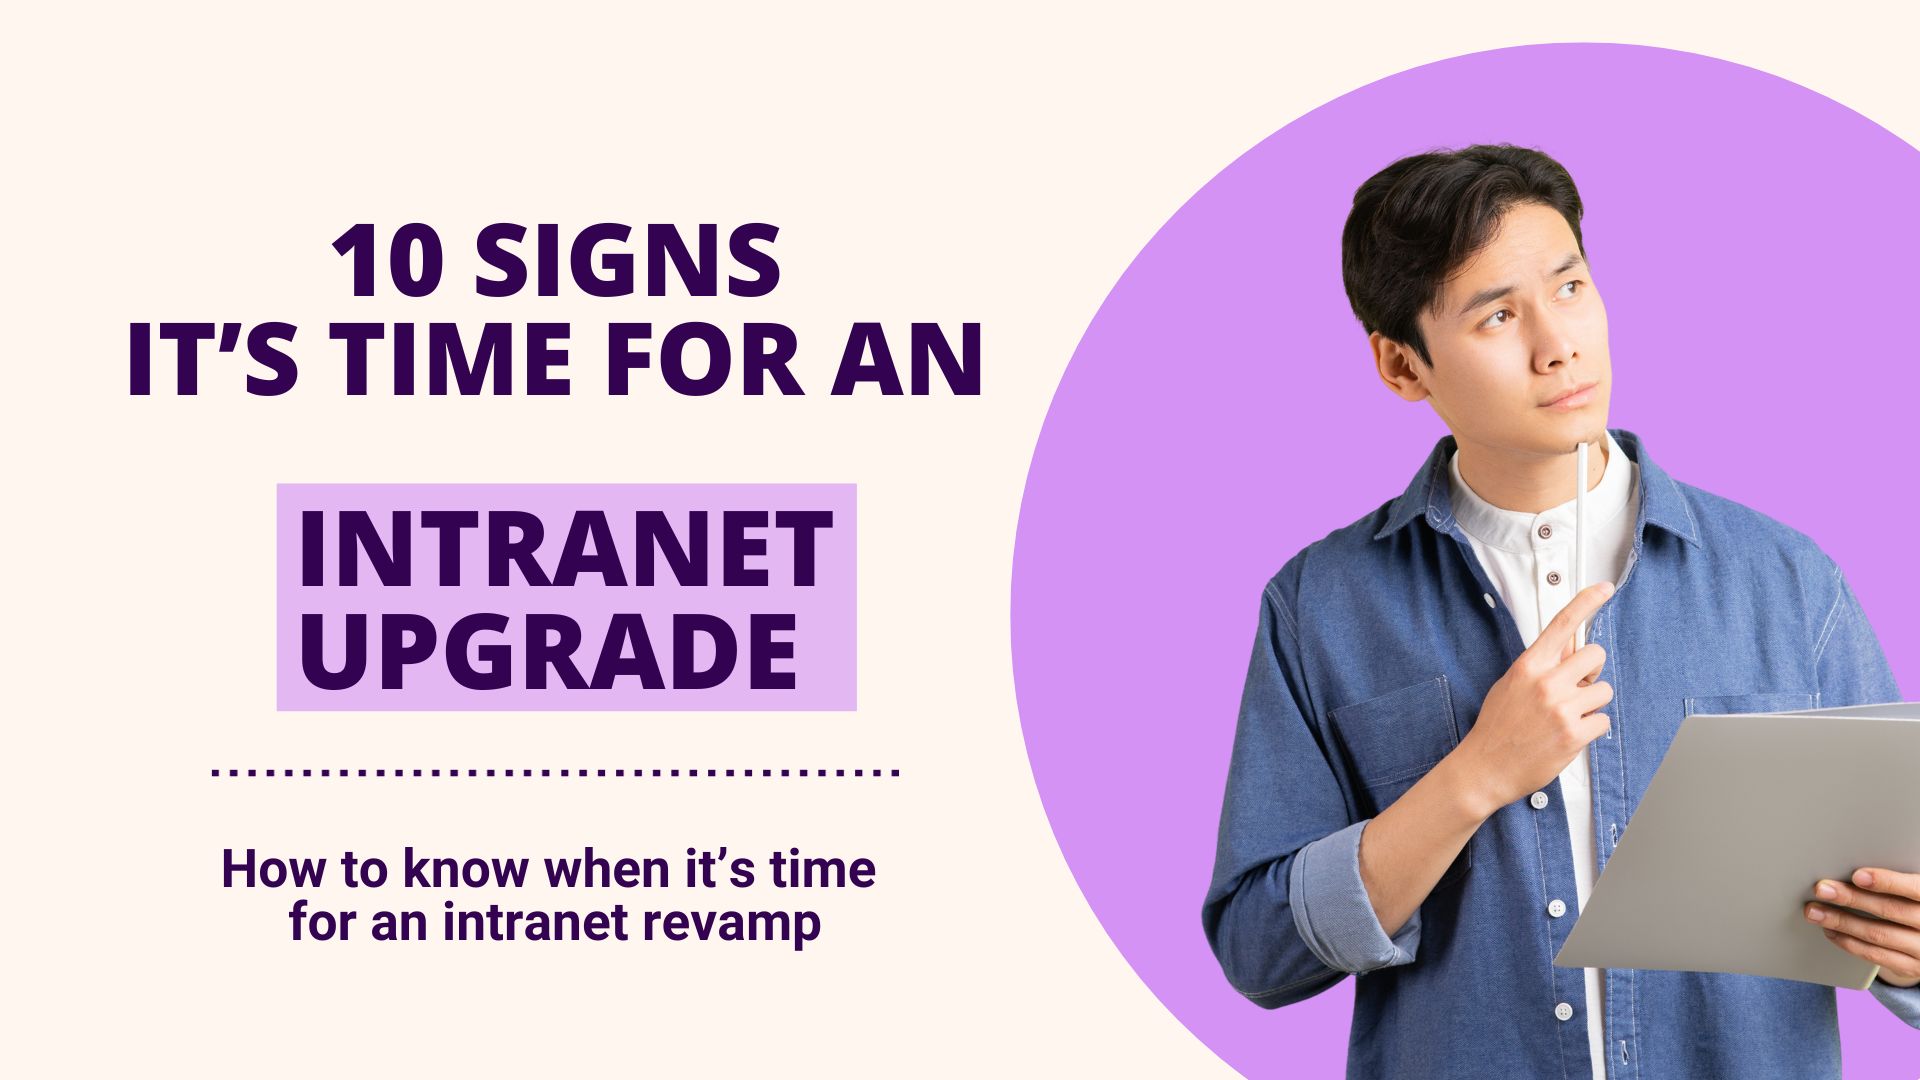 10 Signs It’s Time for a Company Intranet Upgrade